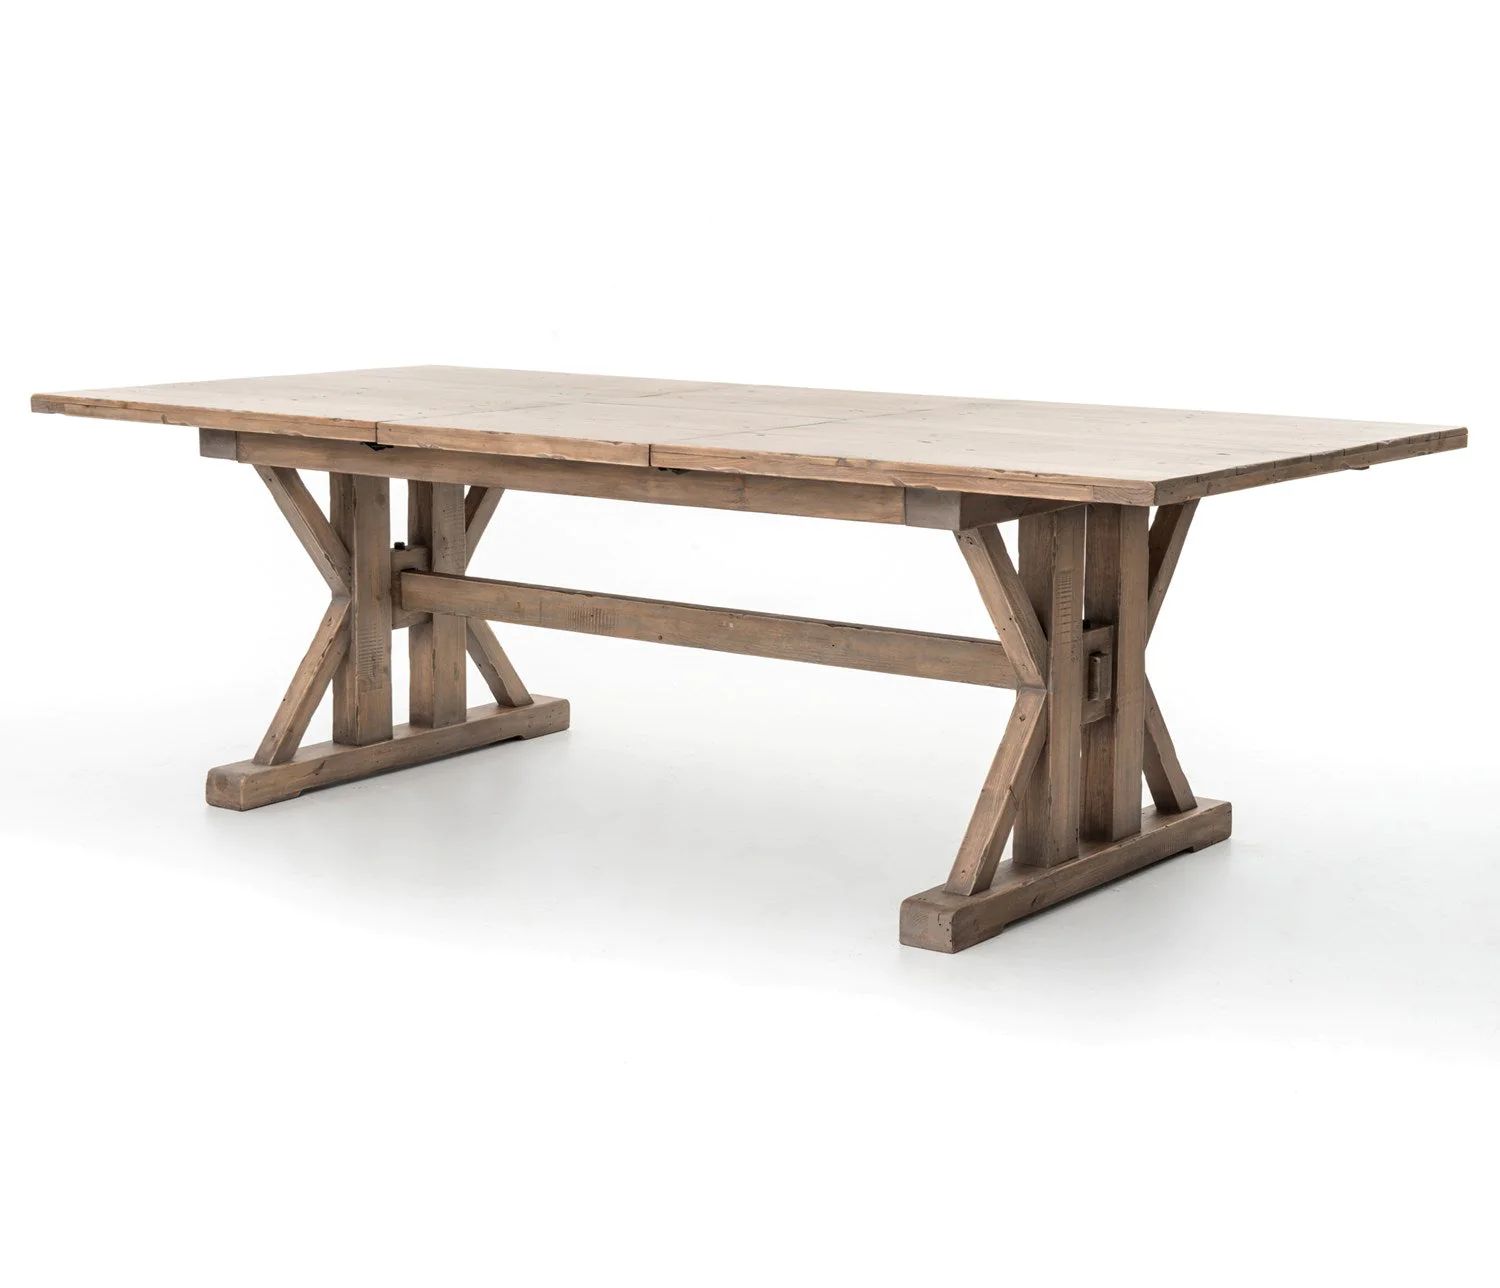 Tuscan Spring Extension Dining Table in Various Colors – BURKE DECOR | Burke Decor